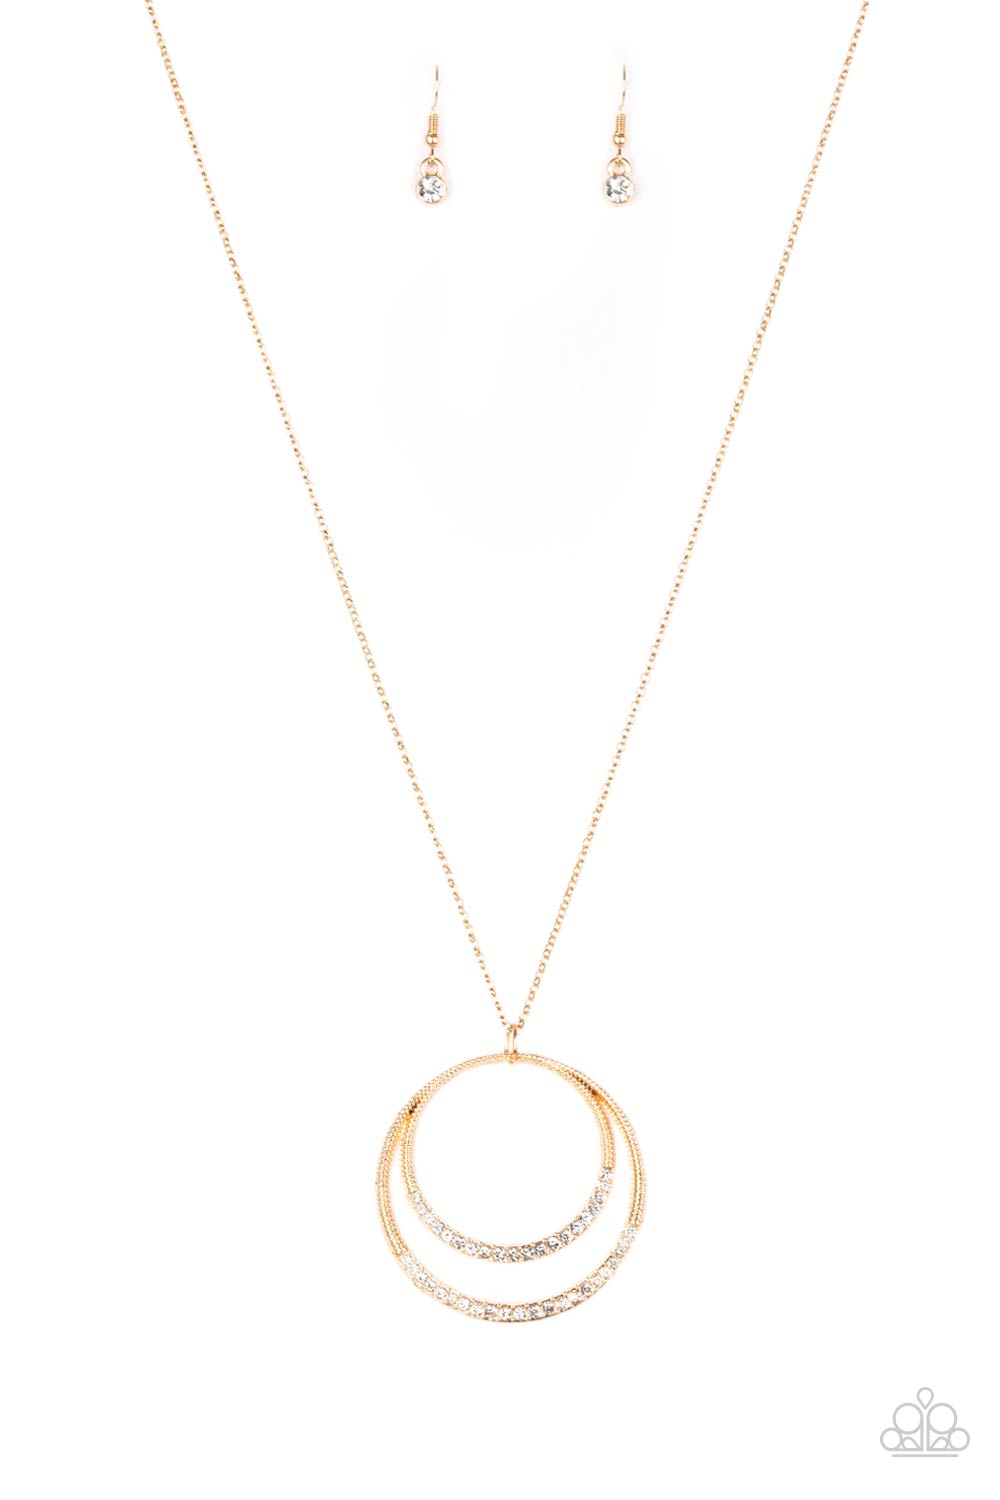 Front and EPICENTER Gold Necklace - Paparazzi